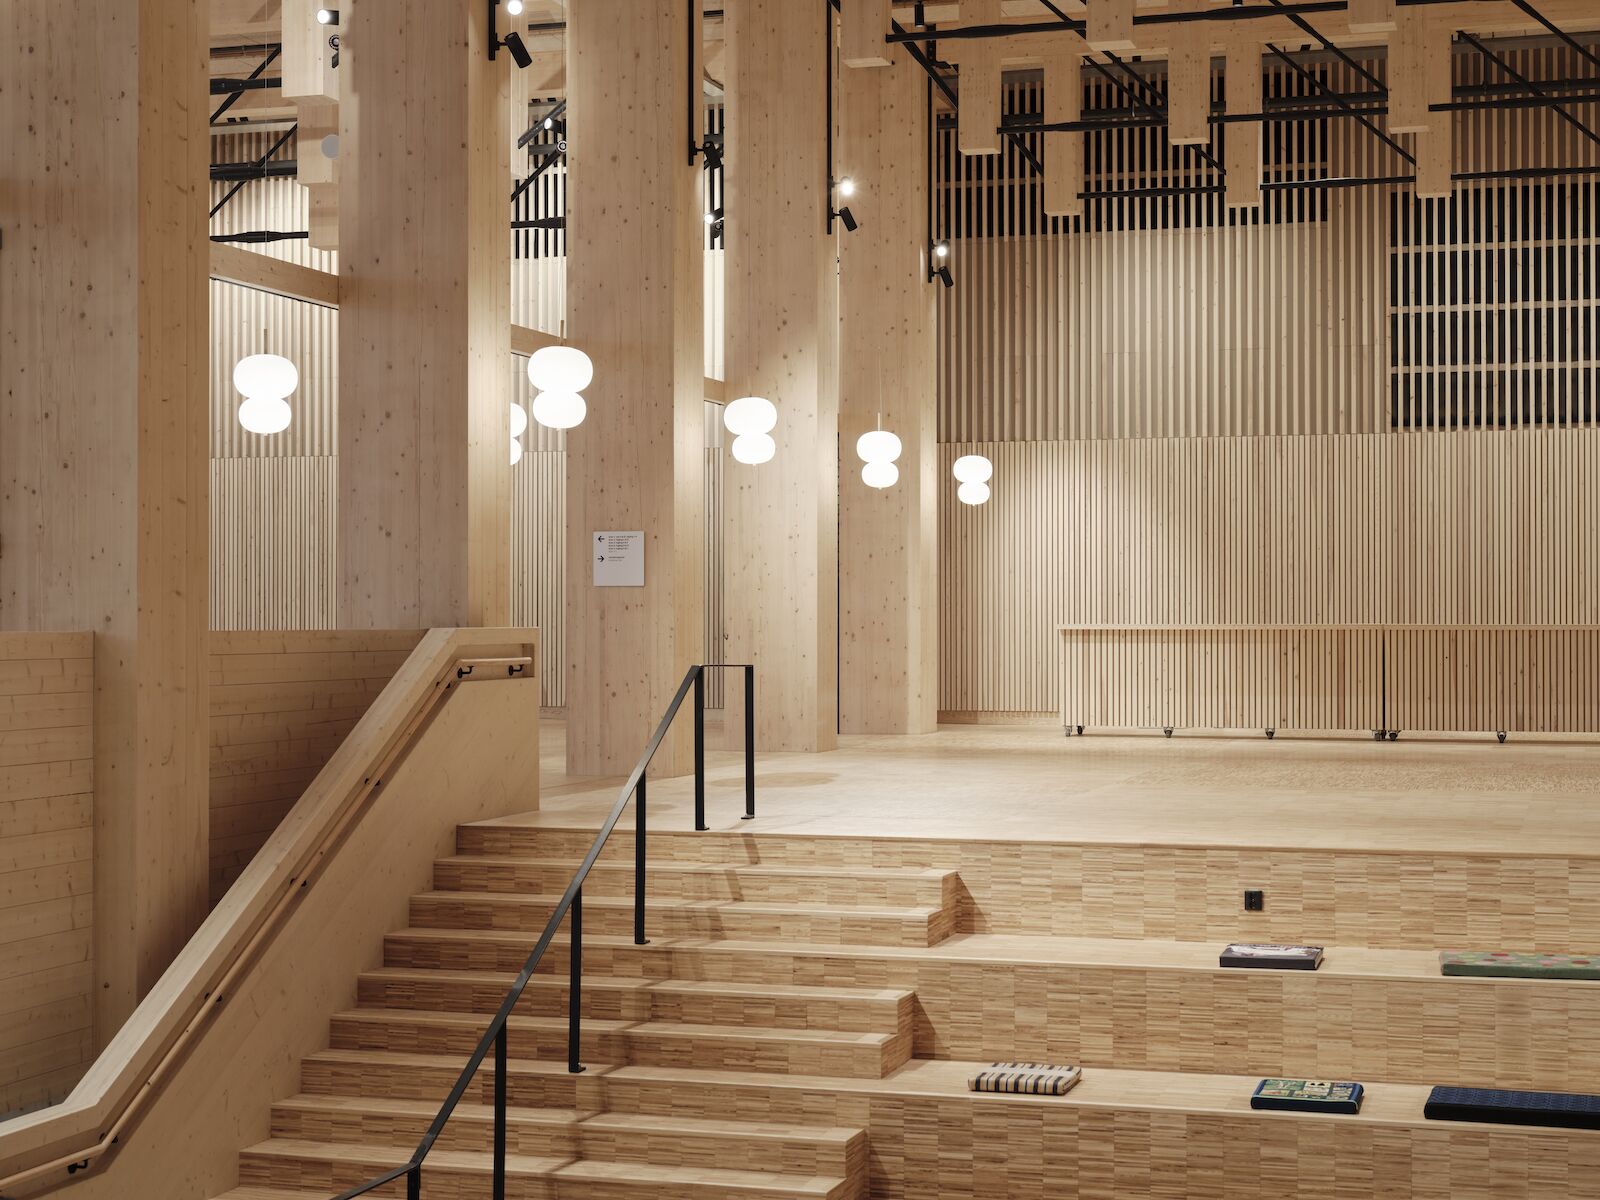 Interior view of the performance space at the Wood Hotel in Sweden